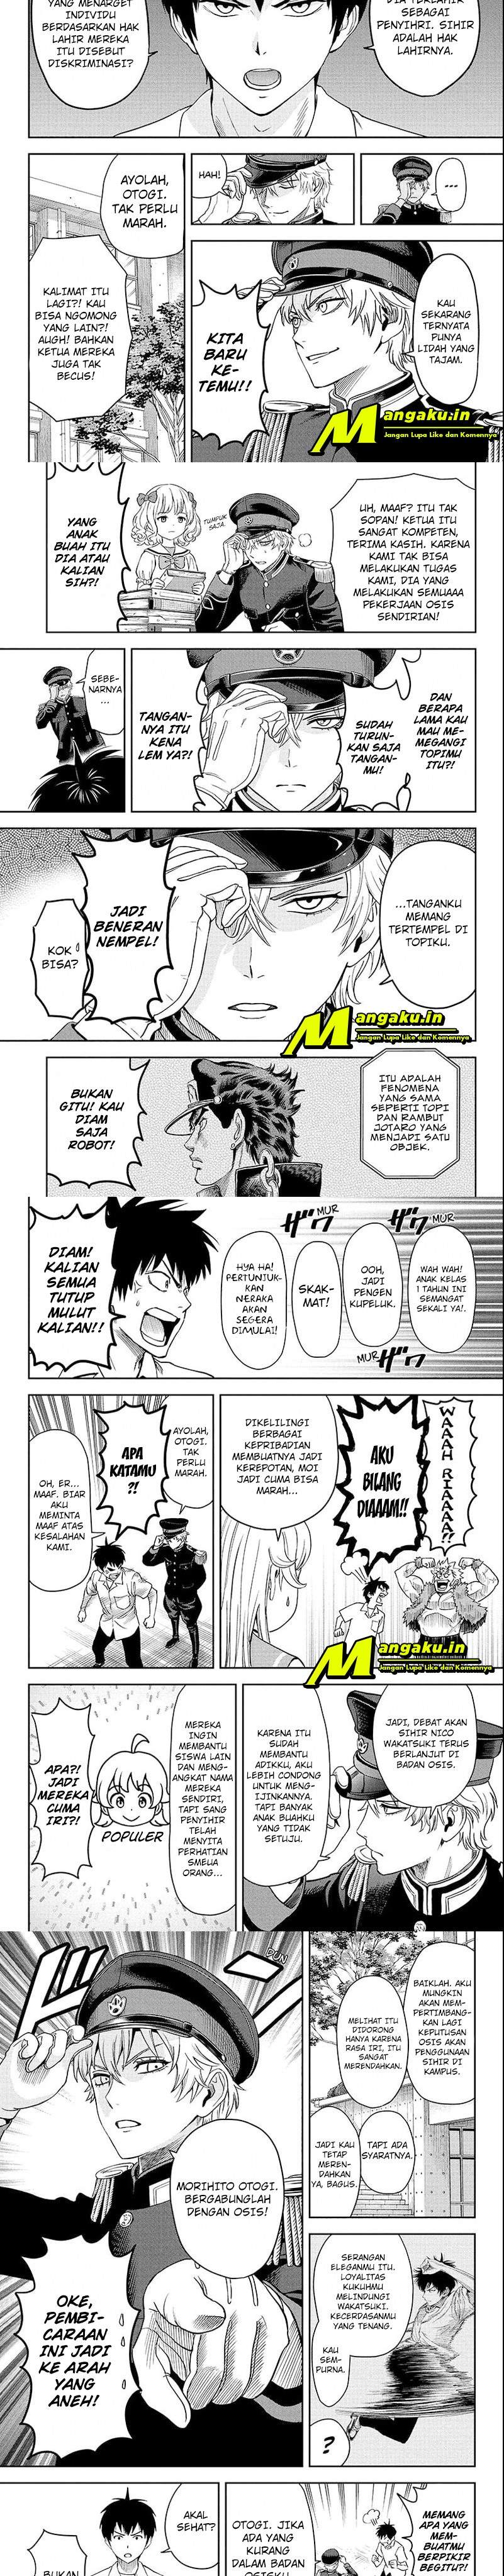 Witch Watch Chapter 38 Bahasa Indonesia